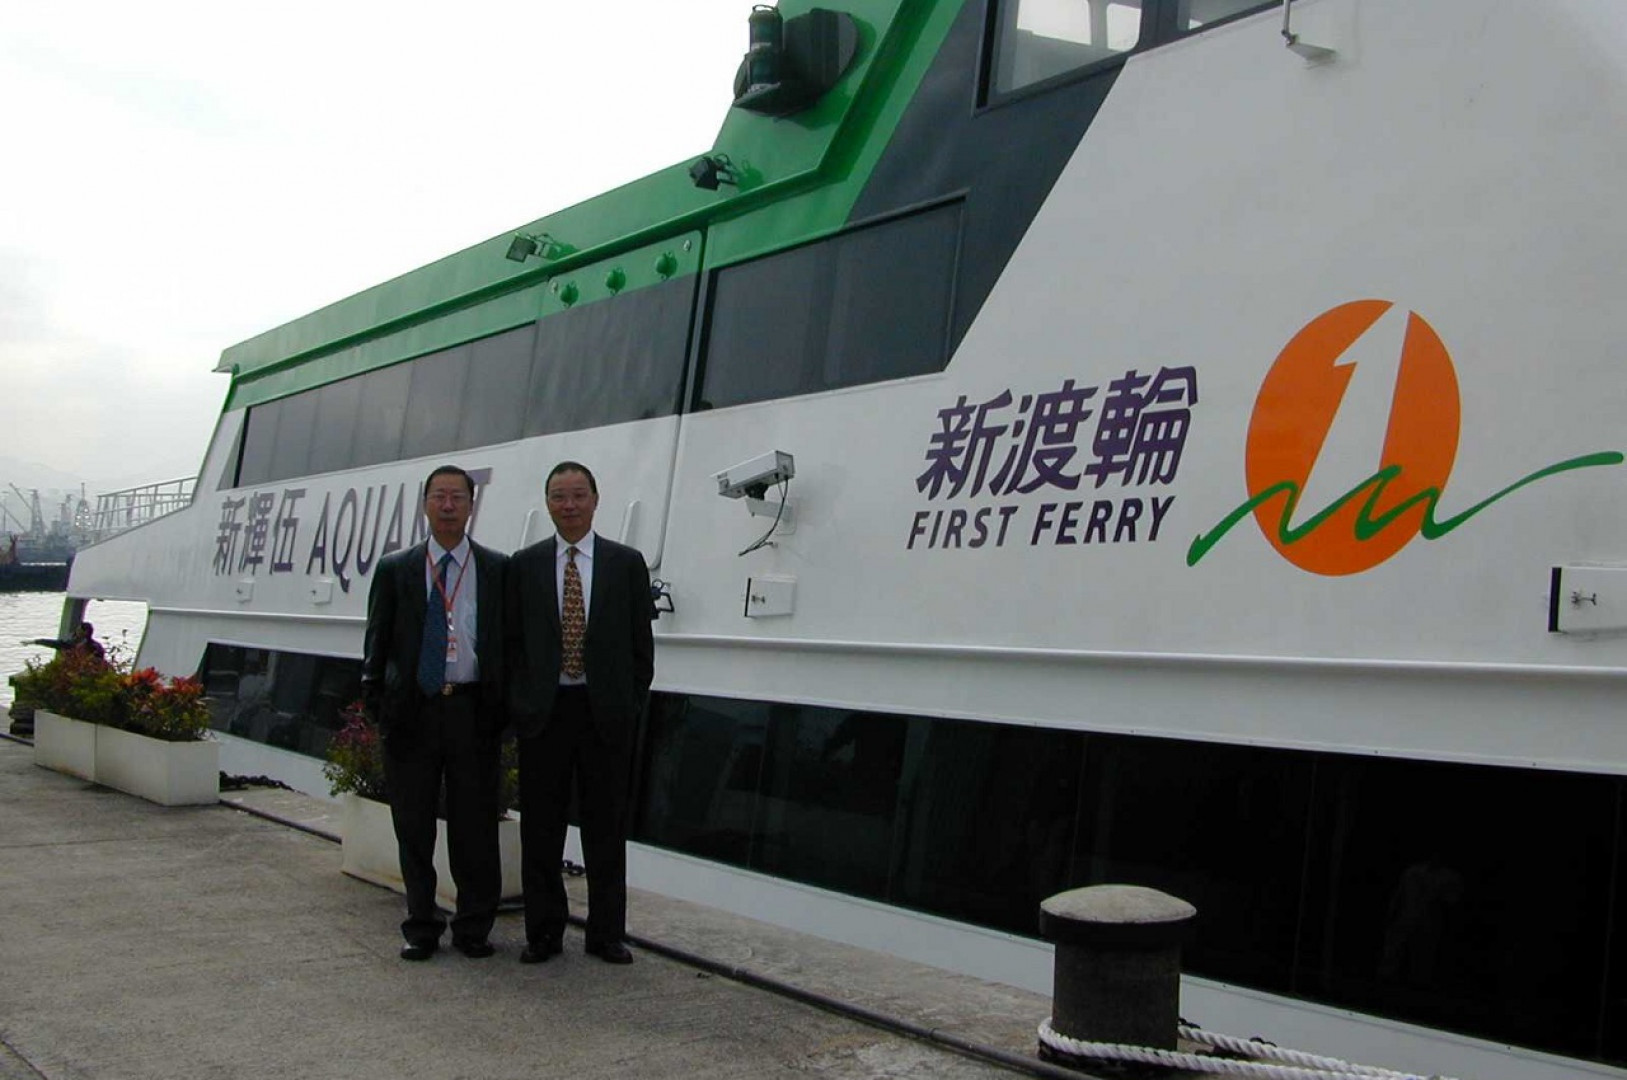 Inauguration ceremony of First Ferry III and First Ferry V